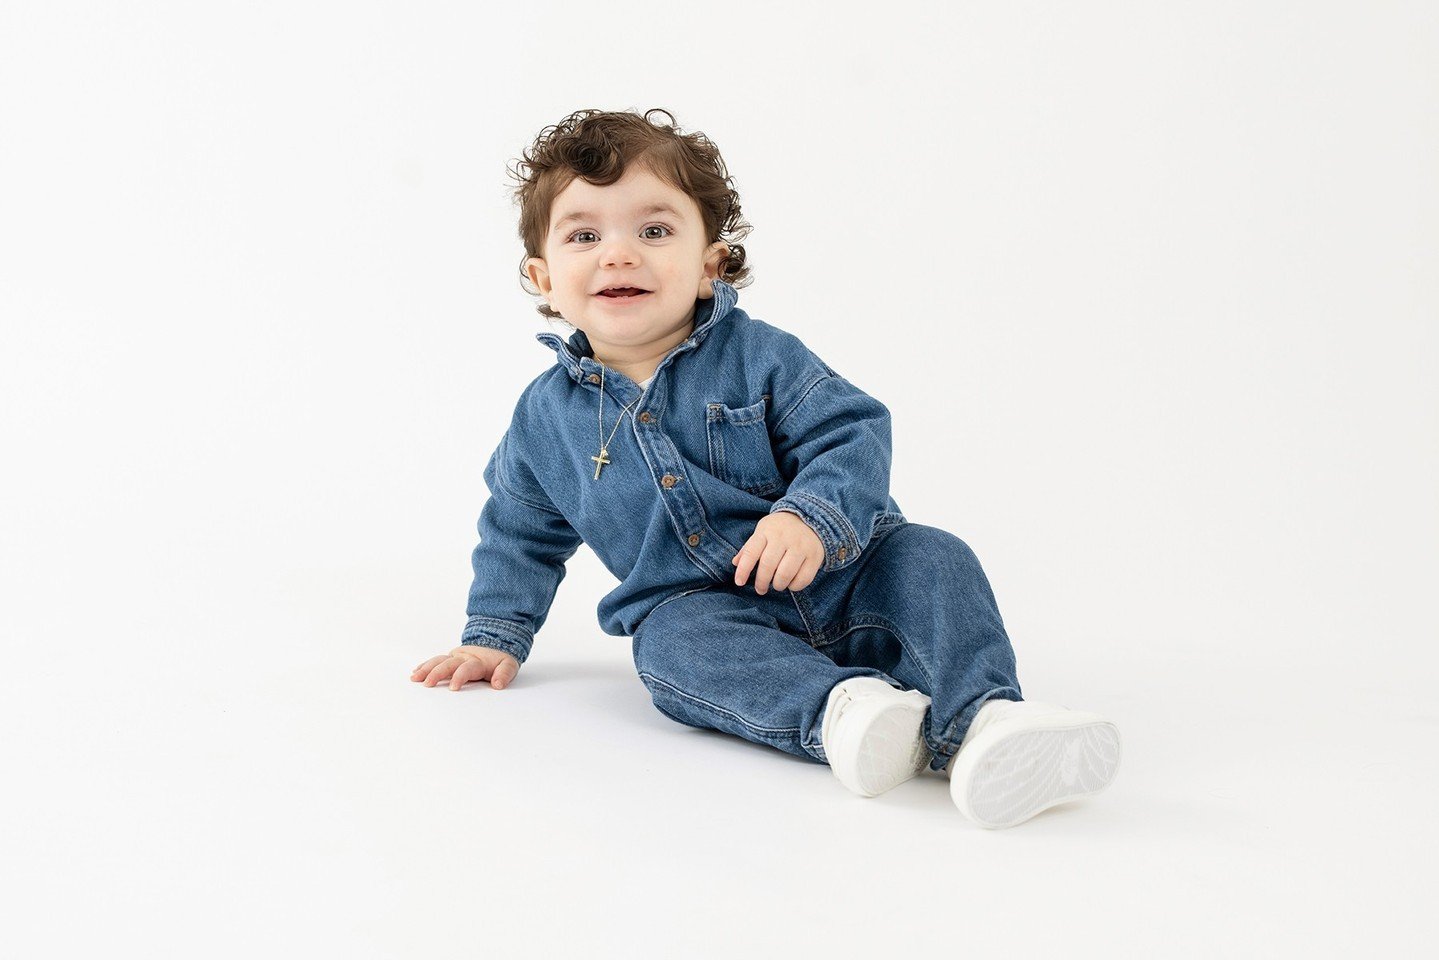 I mean, we all wish we looked so cute in a jean jumpsuit! The best OOTD.
.⁠
.⁠
.⁠
#FamilyPortraitSession #NewbornPhotographers #NewbornPhotographyProps #NewbornPhotoshoot #NewbornInspiration #PhotographyBackdrops #TheEverymom #TheBump #NJFamilyPhotog